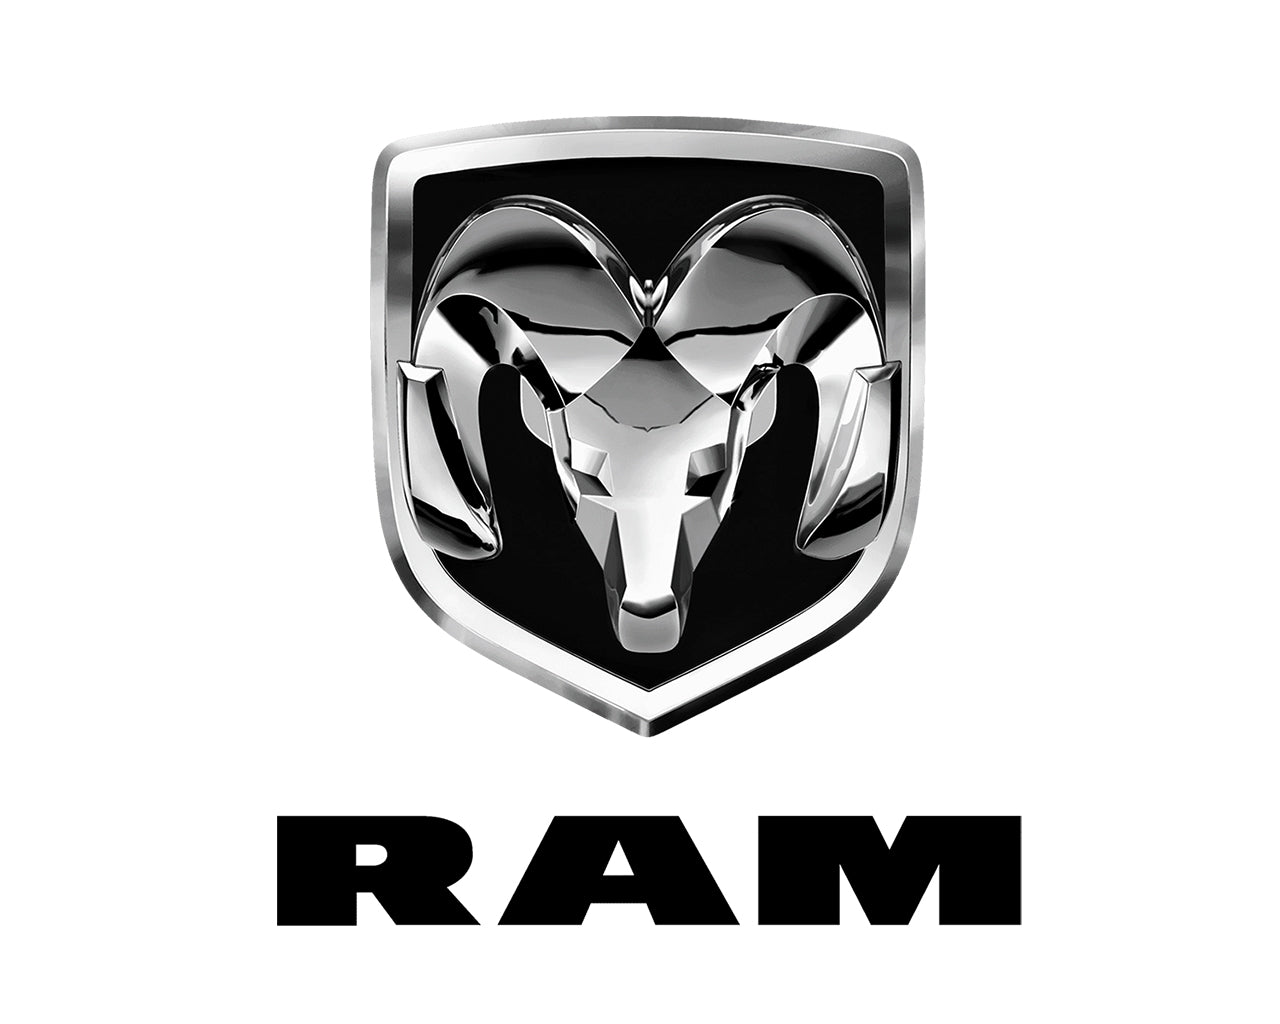 Chrome ram head in a shield with a black background oriented above the word RAM in all caps